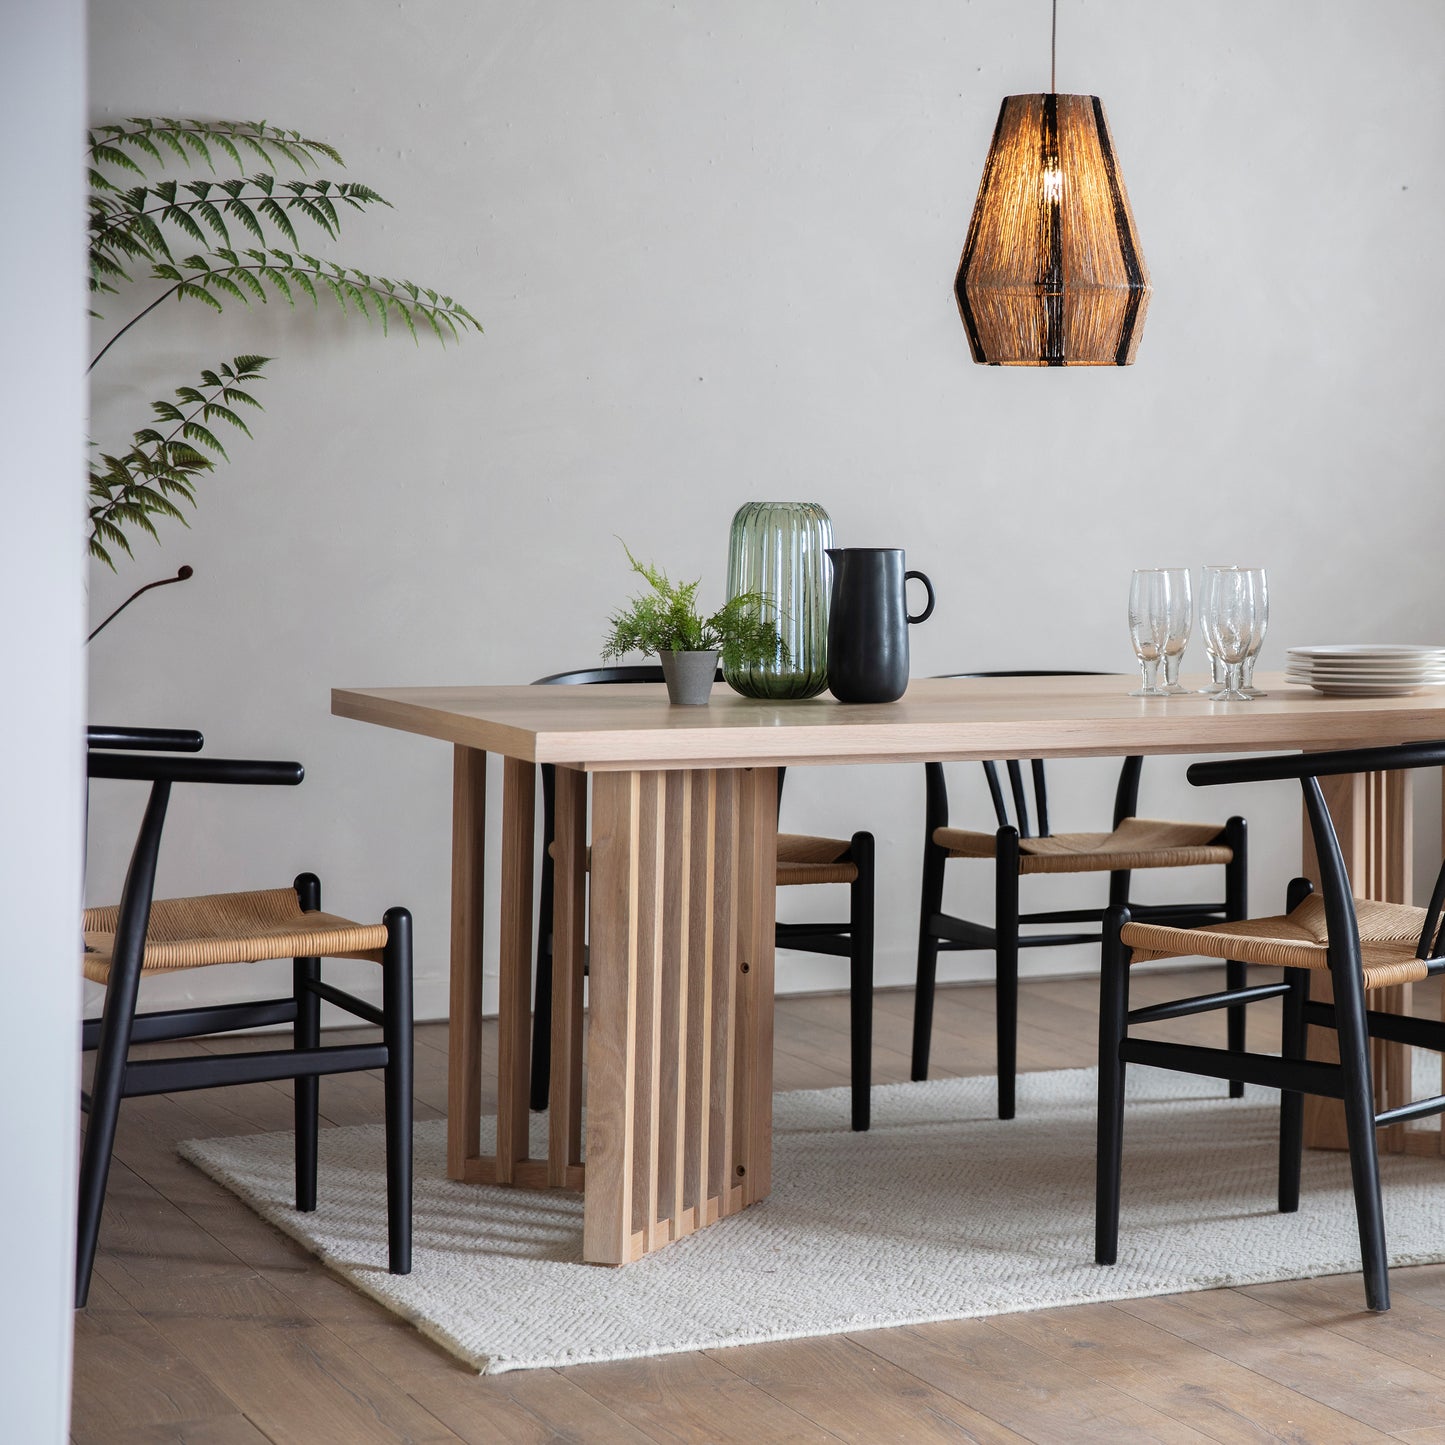 A dining room with stylish interior decor featuring a Tortington Dining Table and chairs from Kikiathome.co.uk.